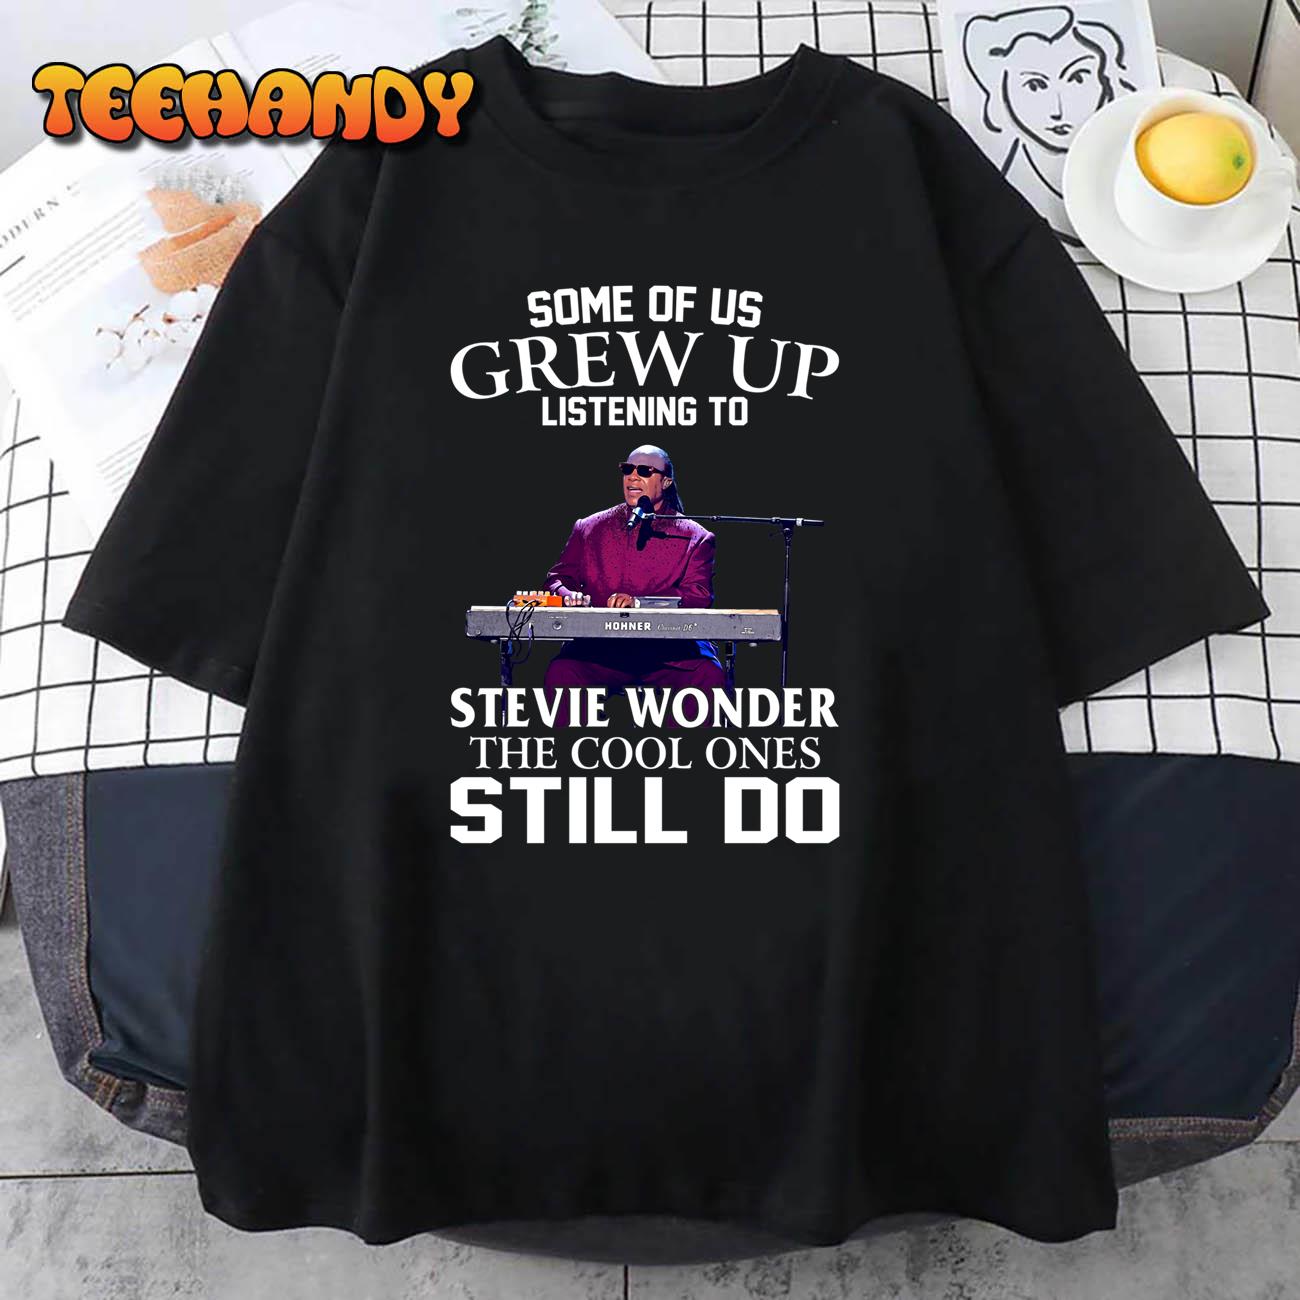 Some Of Us Grew Up Listening To Stevie Wonder The Cool Ones Still Do T-Shirt